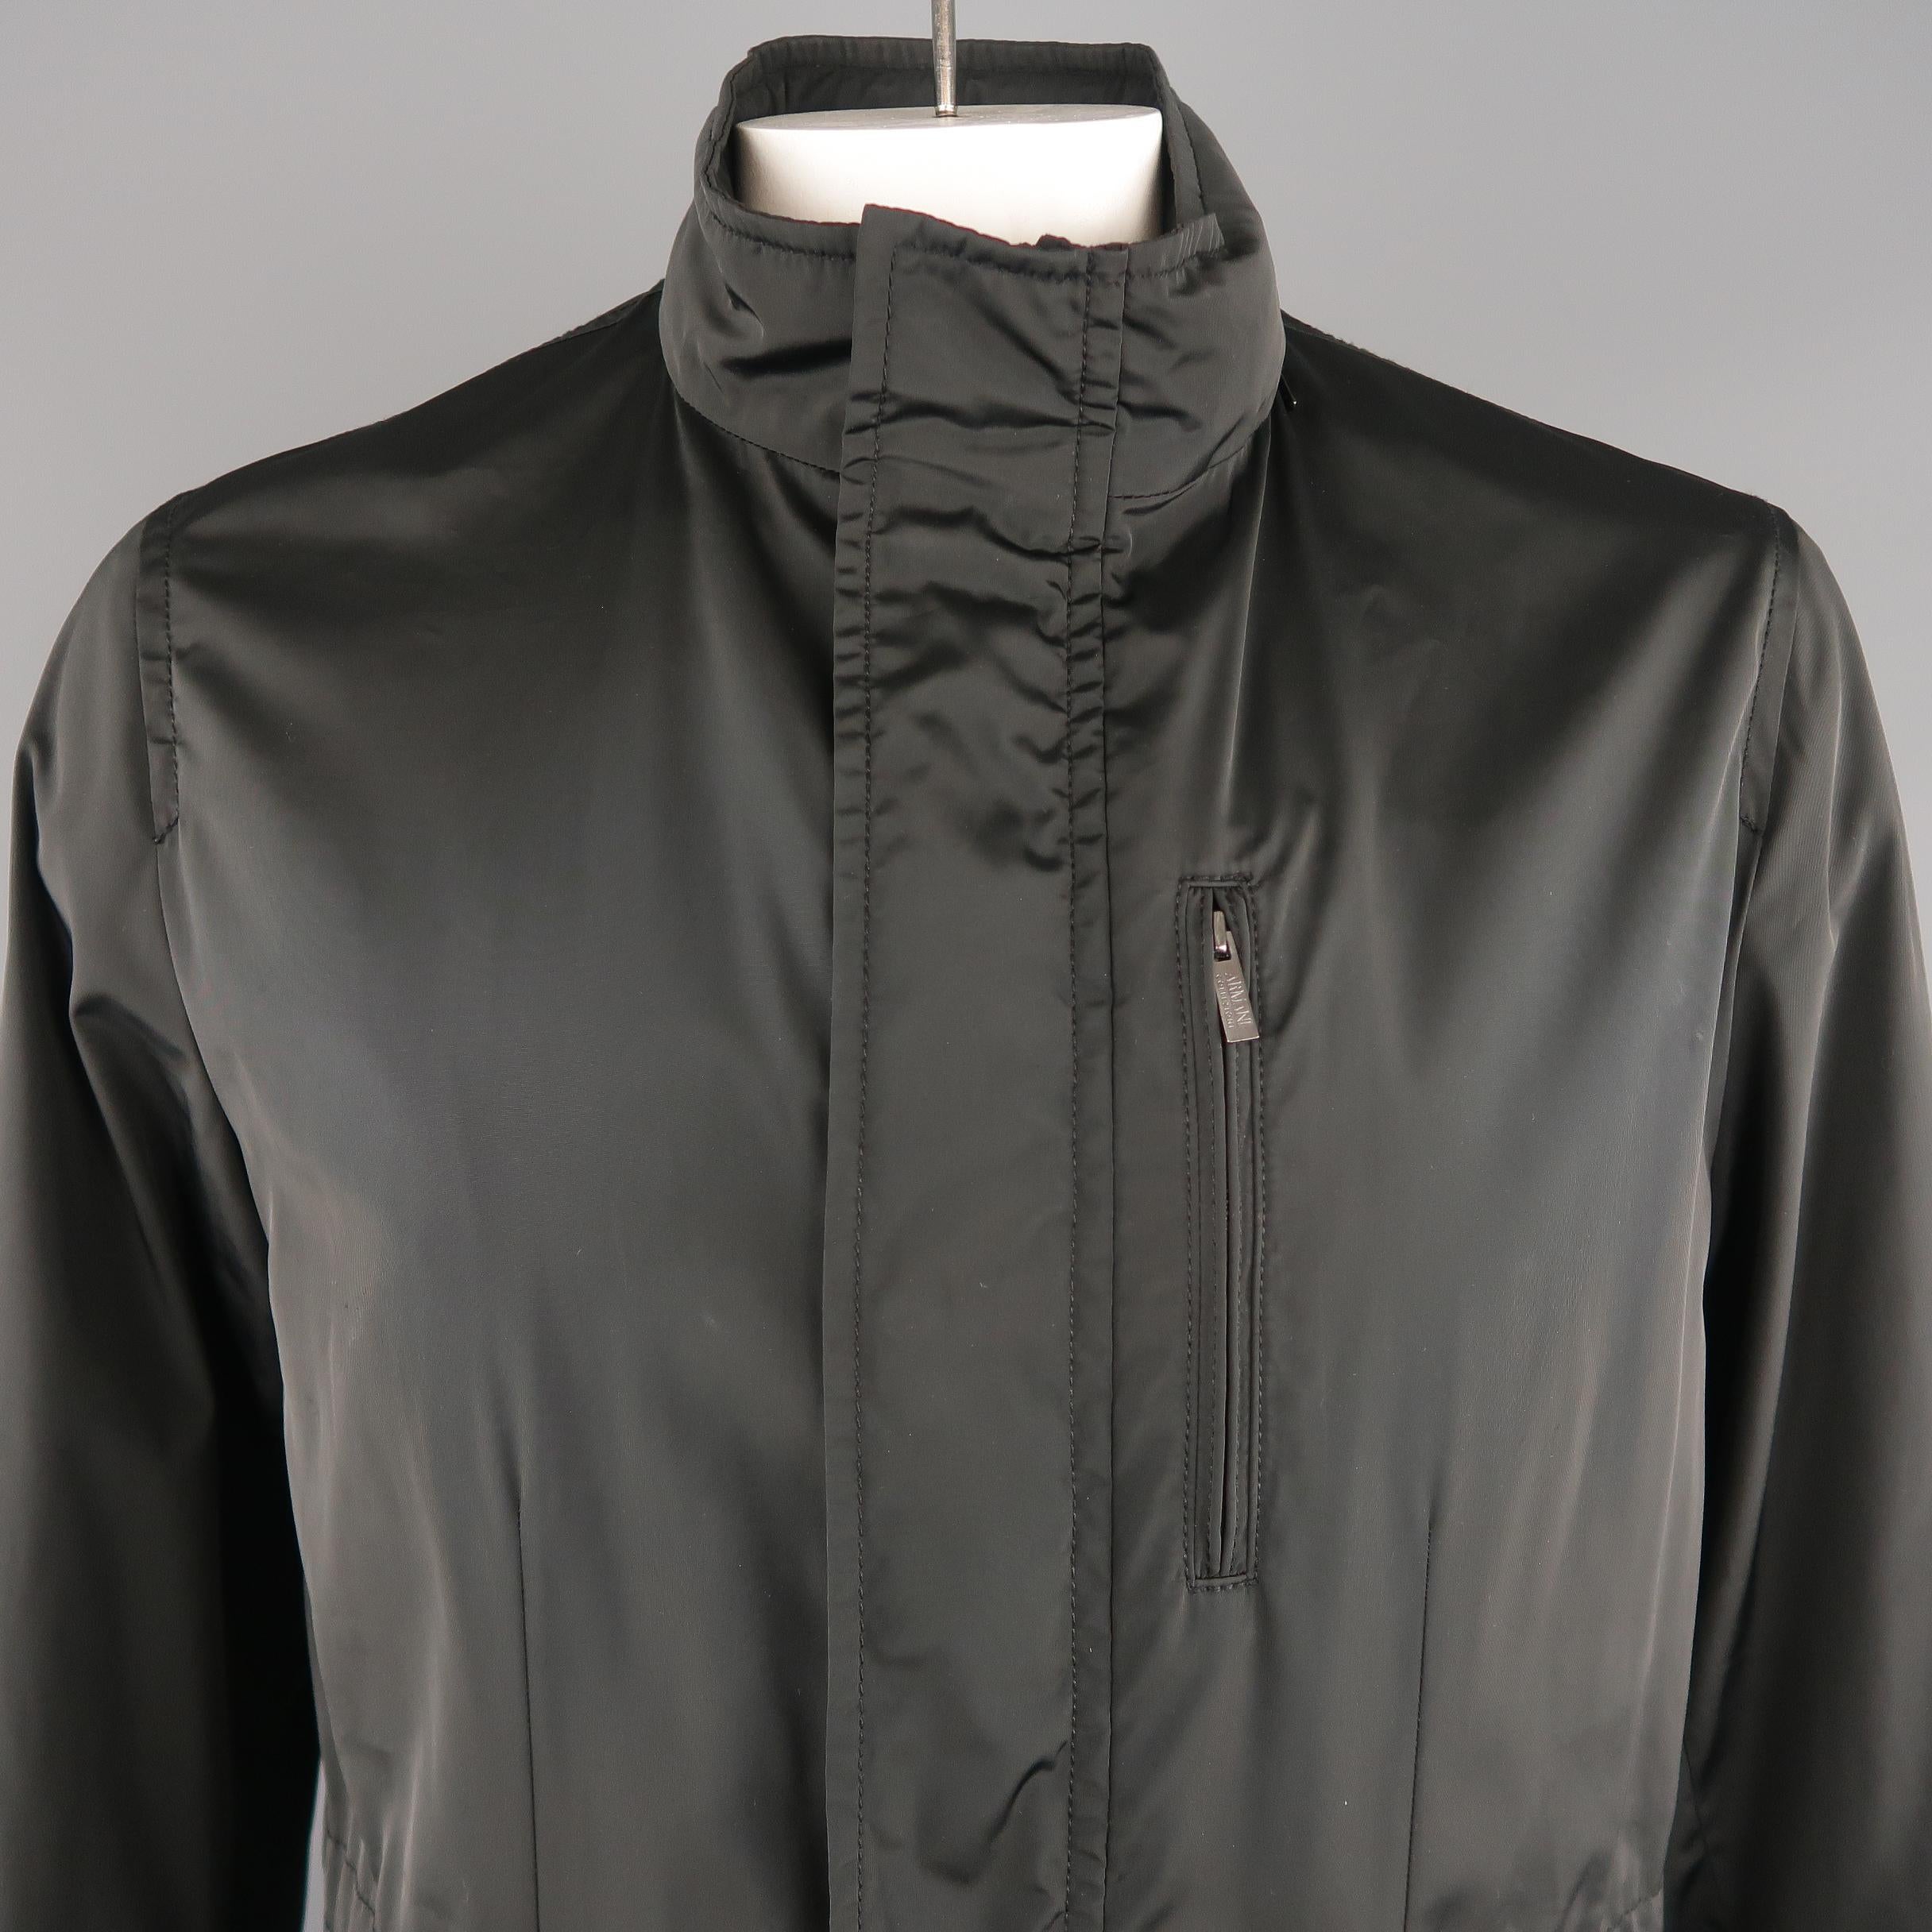 ARMANI COLLEZIONI water repellent  jacket comes in black tone in solid polyester material, with a hoodie,  front zip and flap pockets, zips and snaps.  
 
Excellent  Pre-Owned Condition.
Marked: 40
 
Measurements:
 
Shoulder:  17.5  in.
Chest: 44 